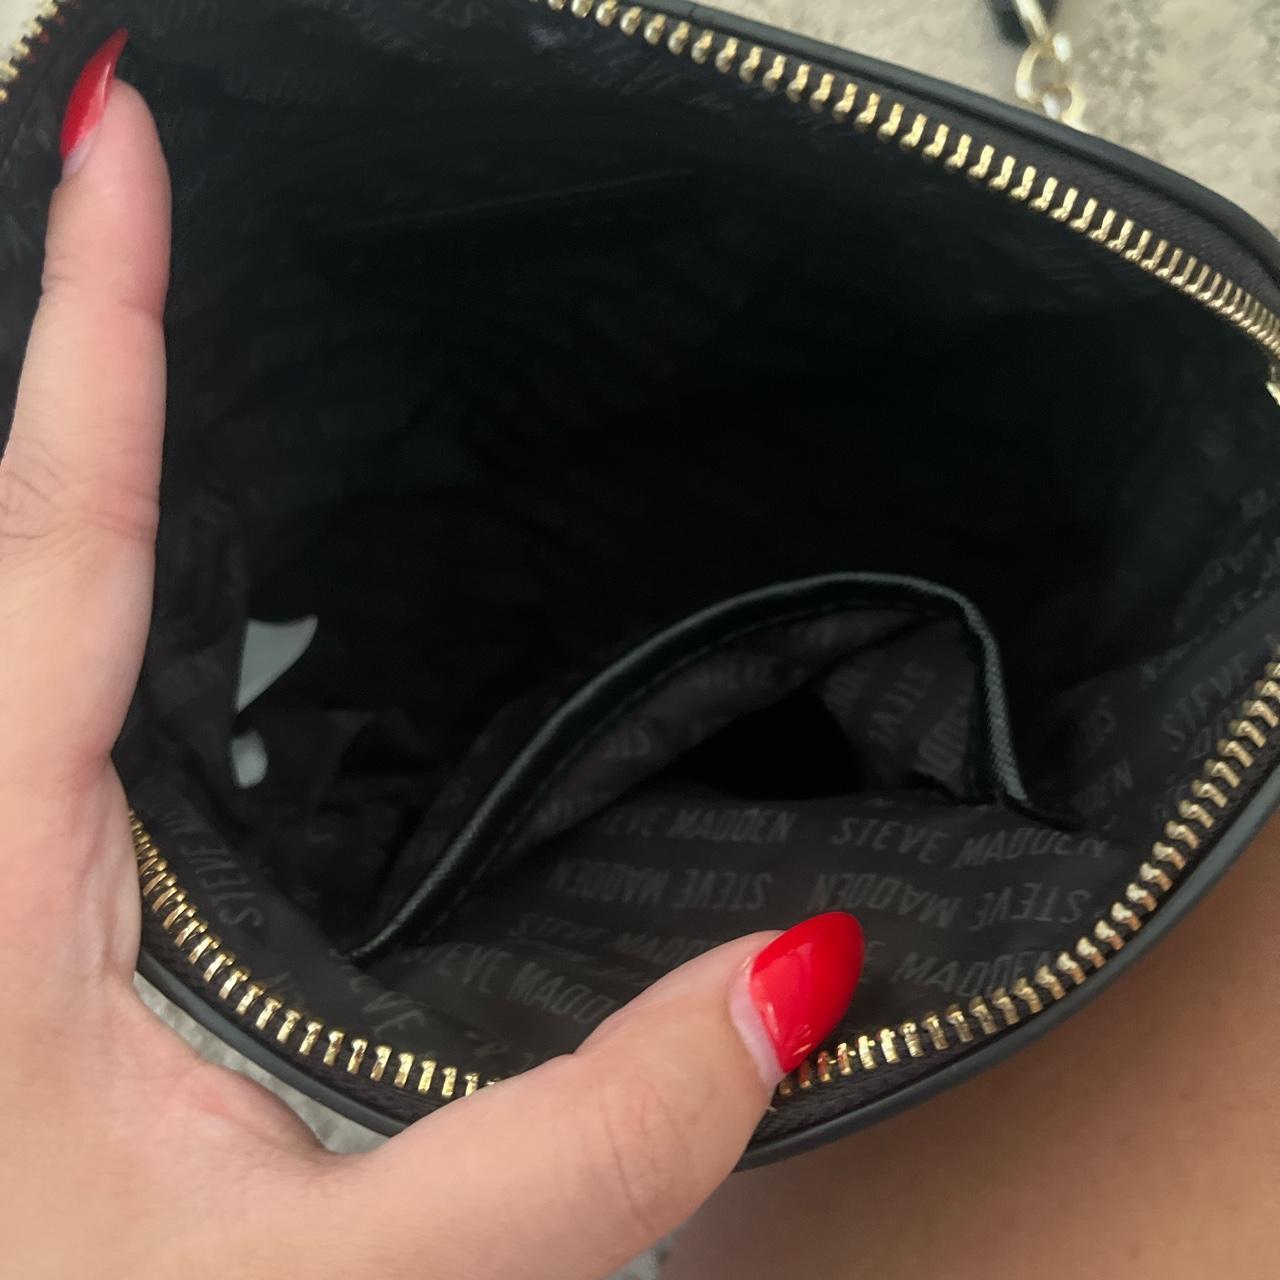 steve madden fanny pack black and silver with no - Depop